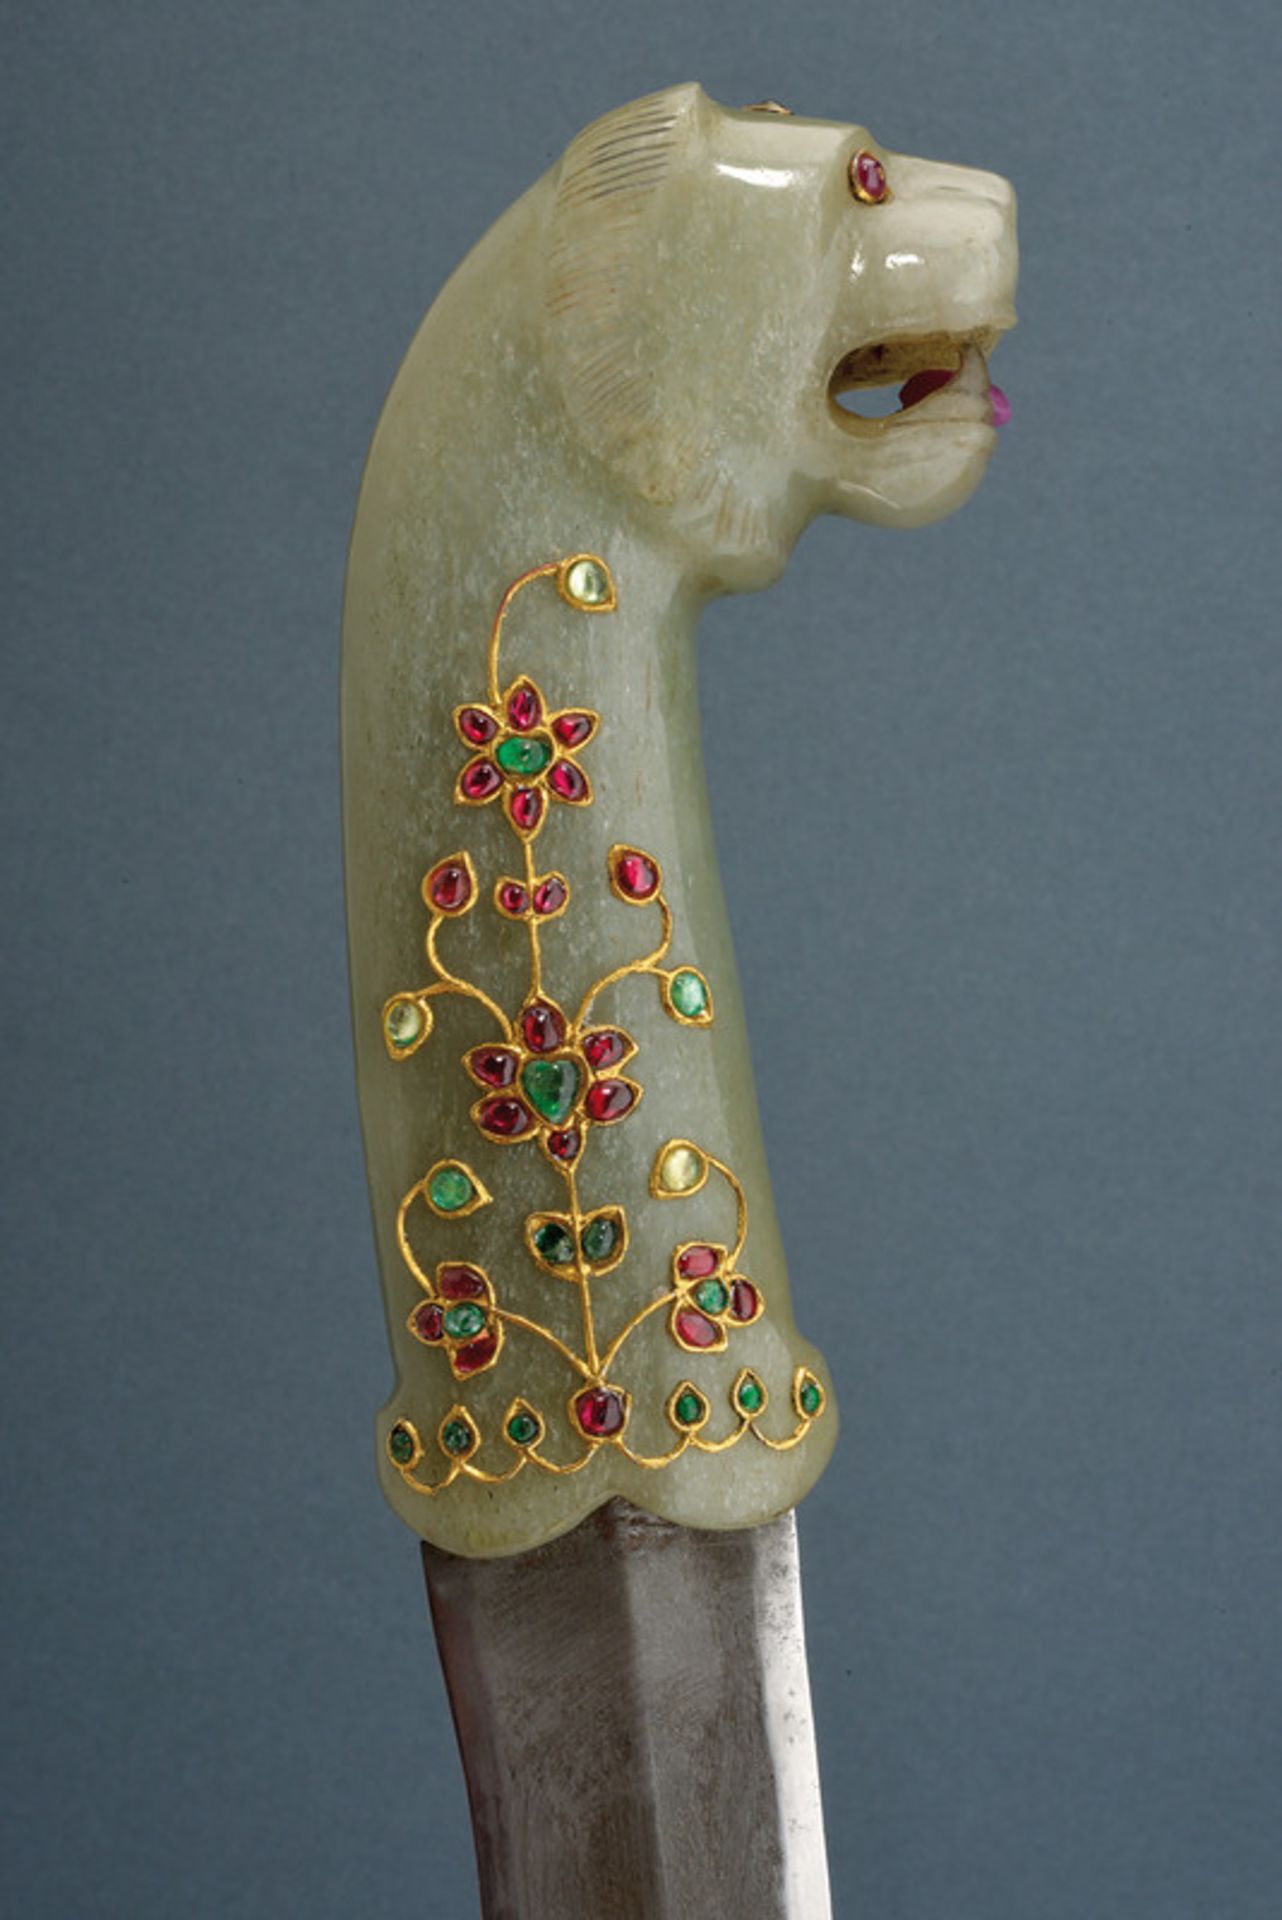 A jade hilted dagger decorated with stones and gold - Image 7 of 9